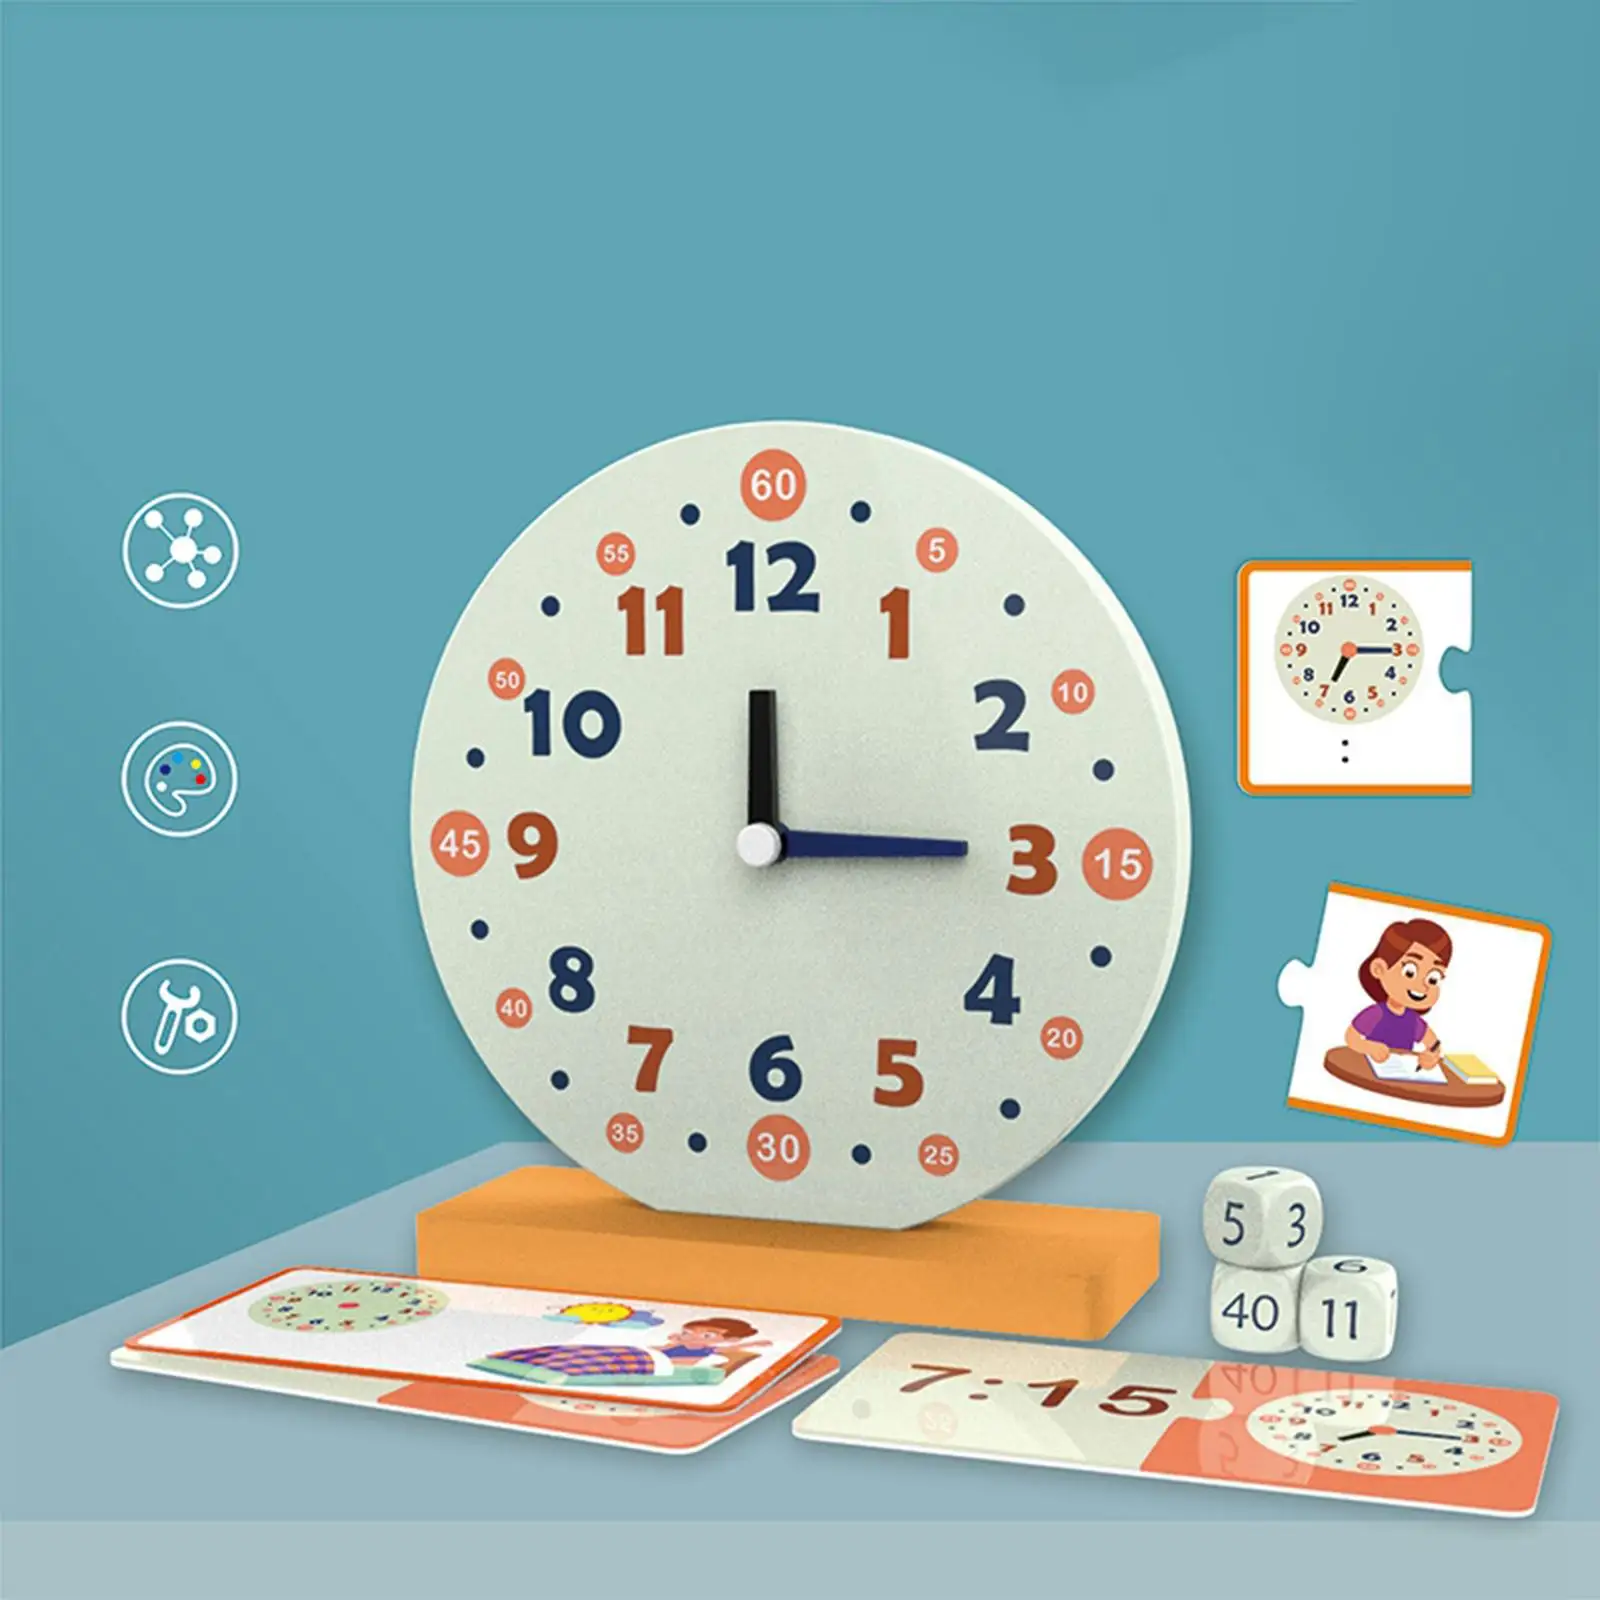 Wooden Teaching Clock Puzzle Toys Early Preschool Teaching Aids with Numbers Learn How to Tell Time Teaching Clock for Classroom